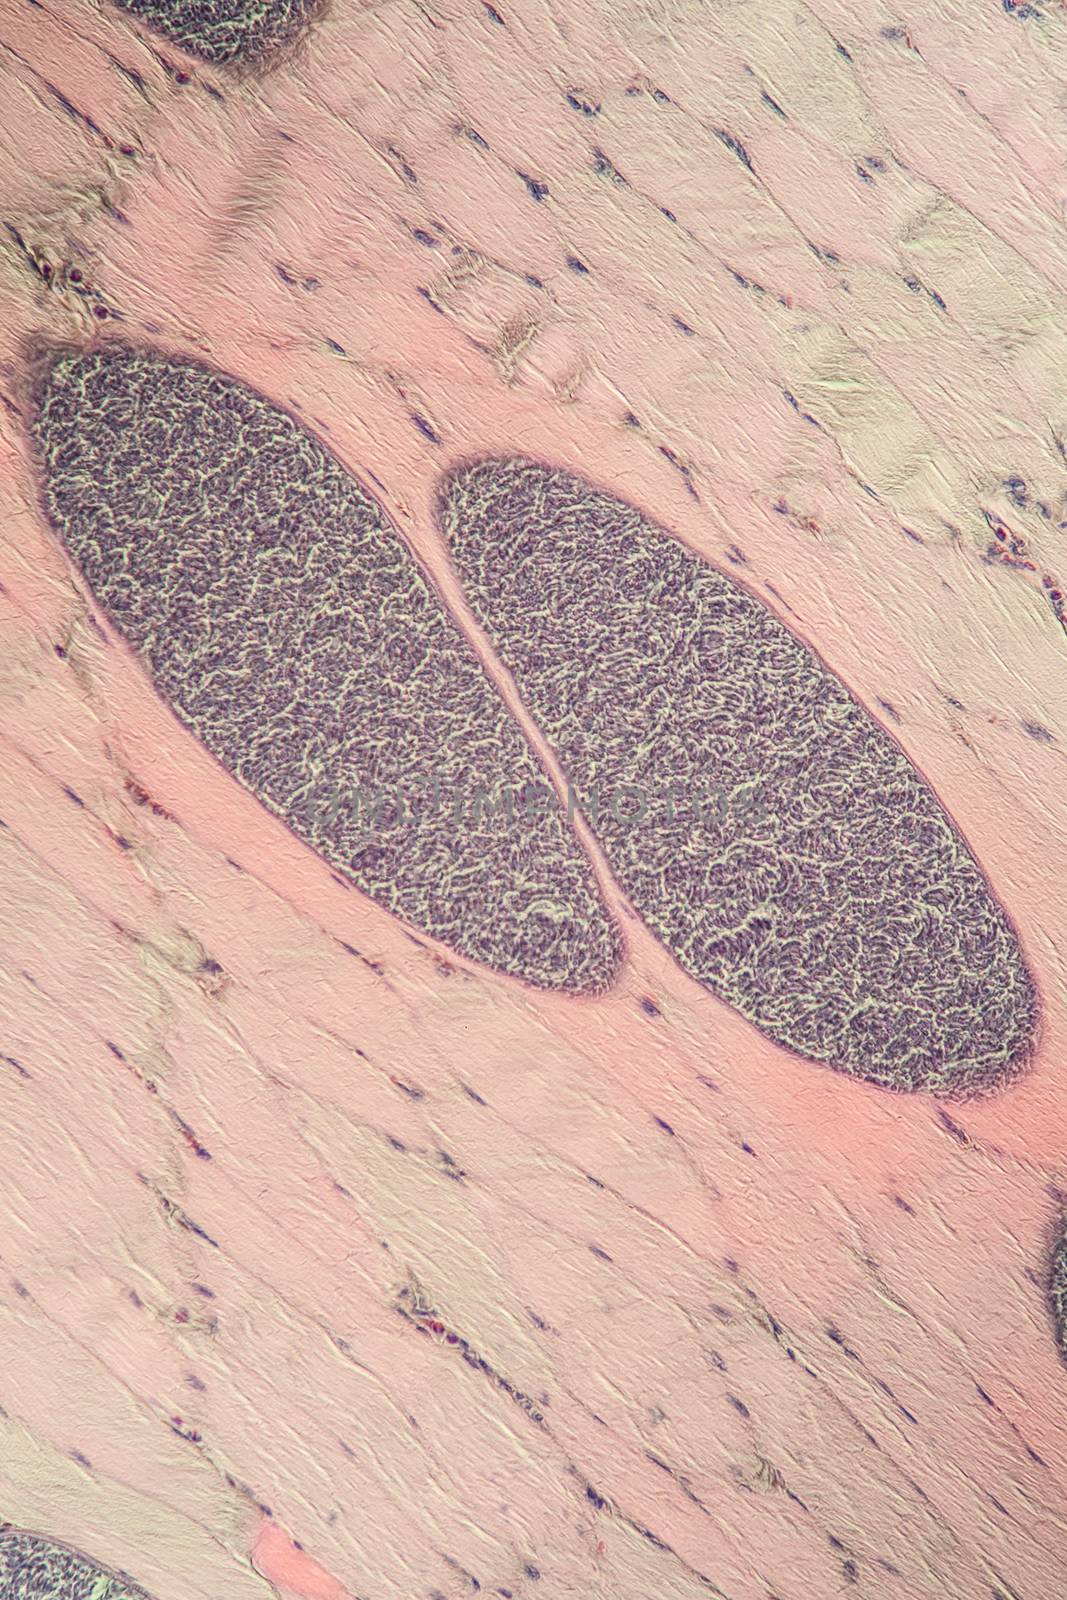 Sarcocystis spore animals in muscle, 200x by Dr-Lange